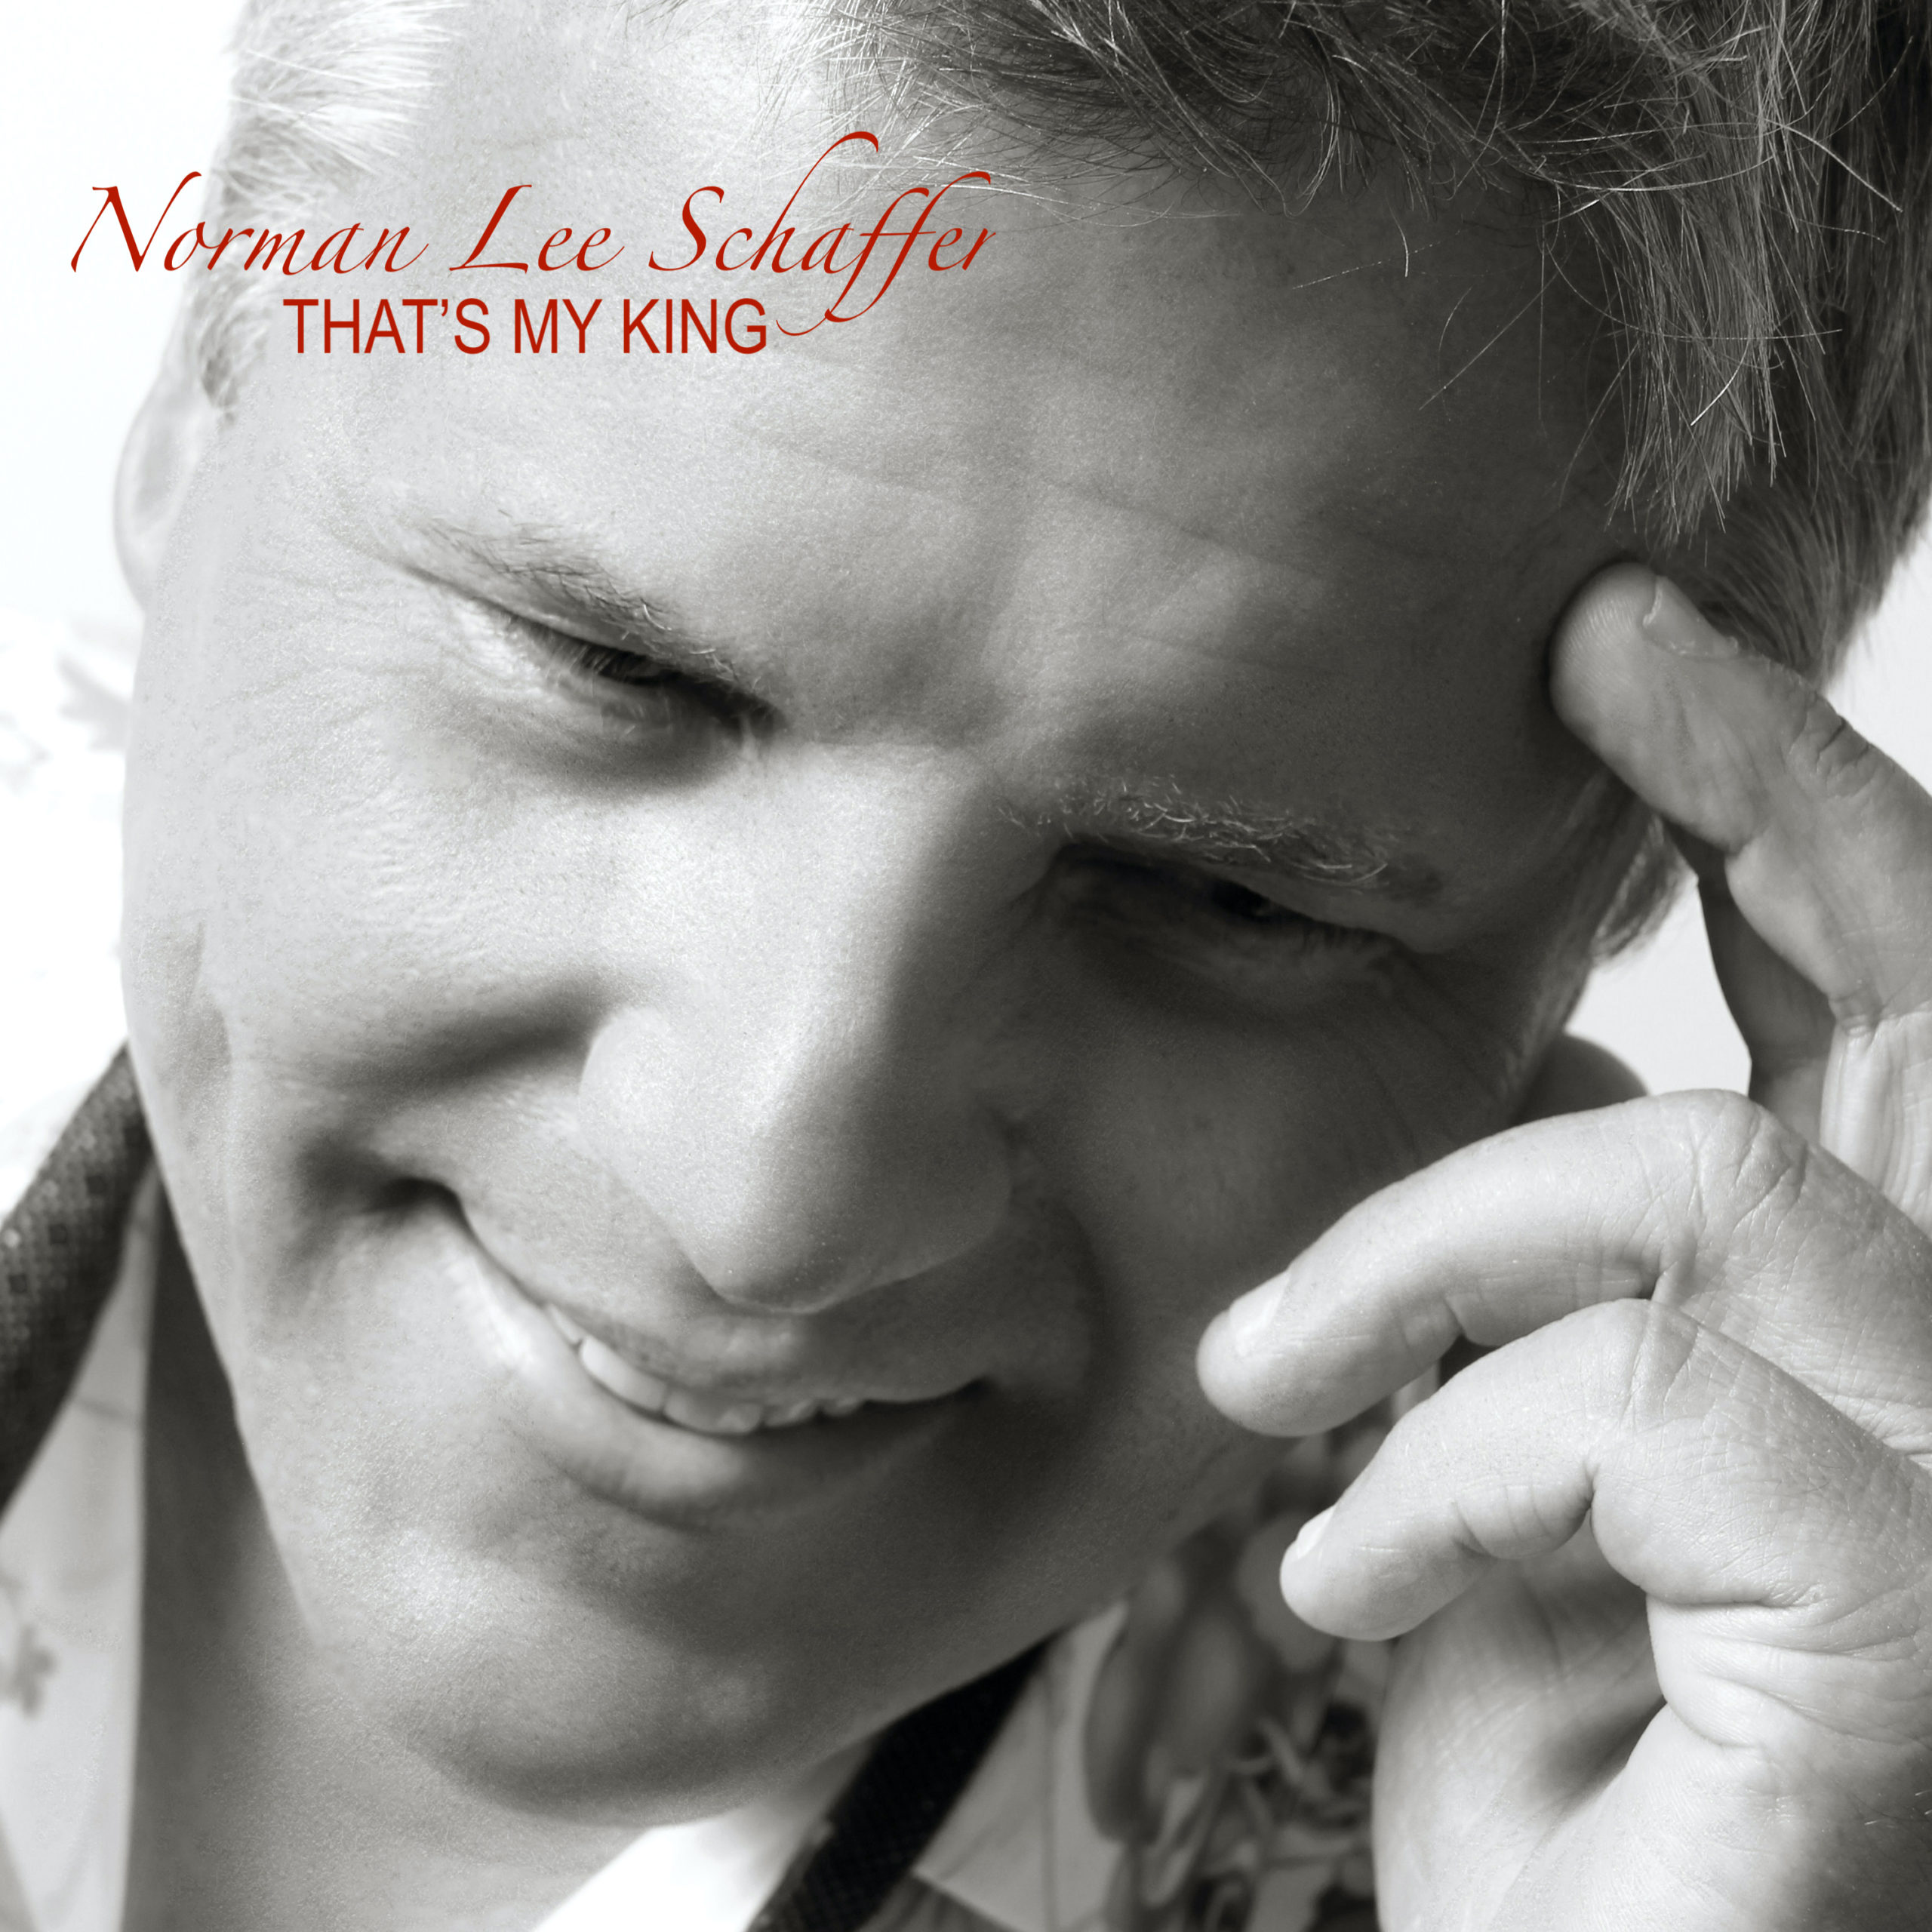 NORMAN LEE SCHAFFER RELEASES NEW SINGLE TODAY